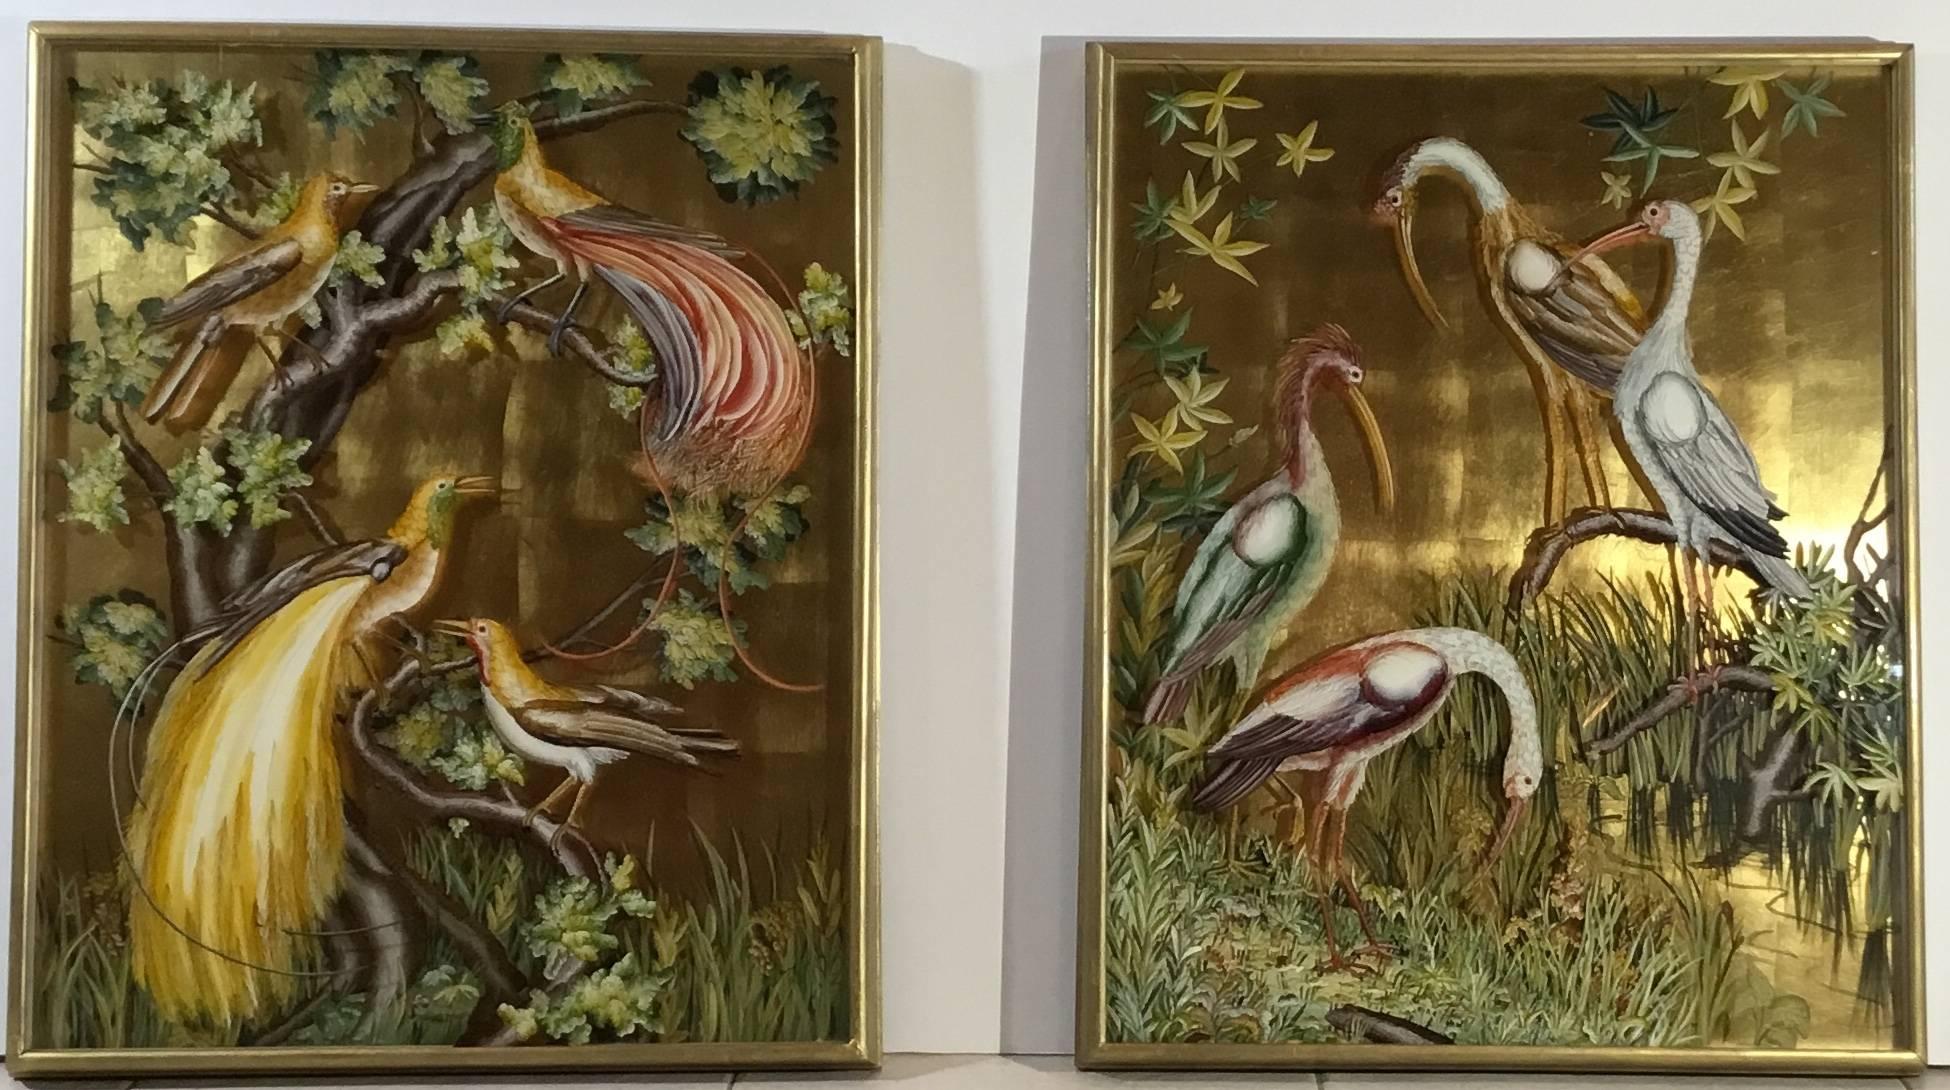 Pair of exquisite vintage reverse paintings on glass made by a special technique with two plates of glass .the back plate is gold gilt glass and is painted with cattail ,grass and vines. the front glass is beautifully reverse painted with birds